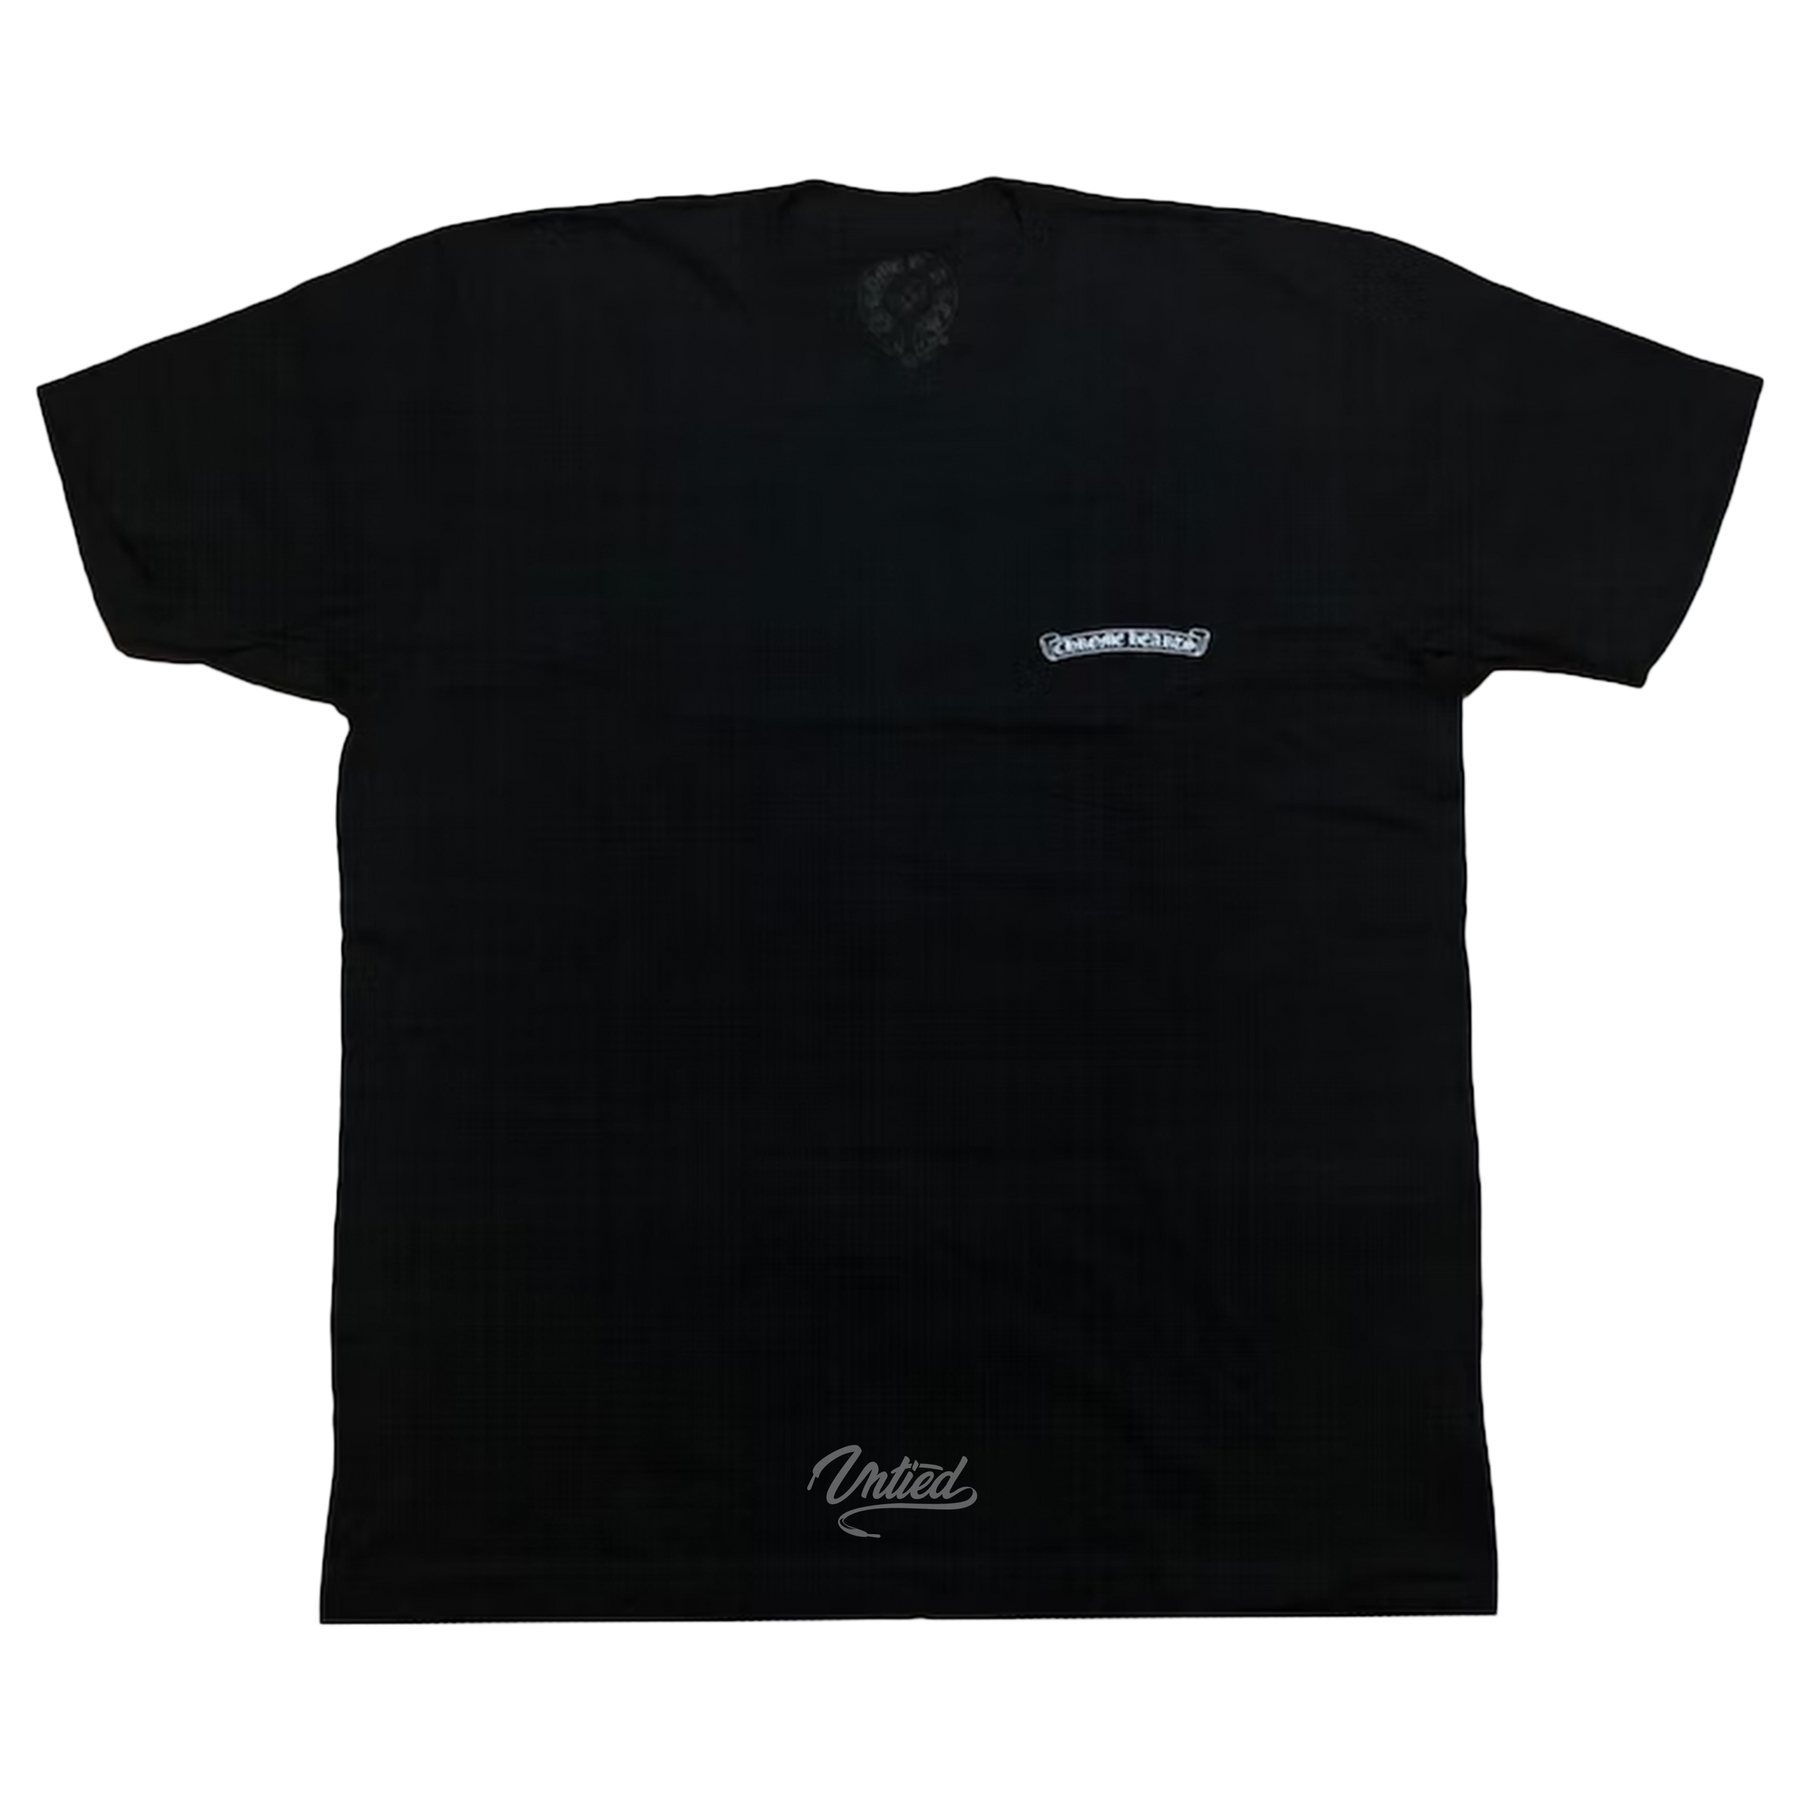 Chrome Hearts Welcome To Las Vegas Tee "Black/Color"